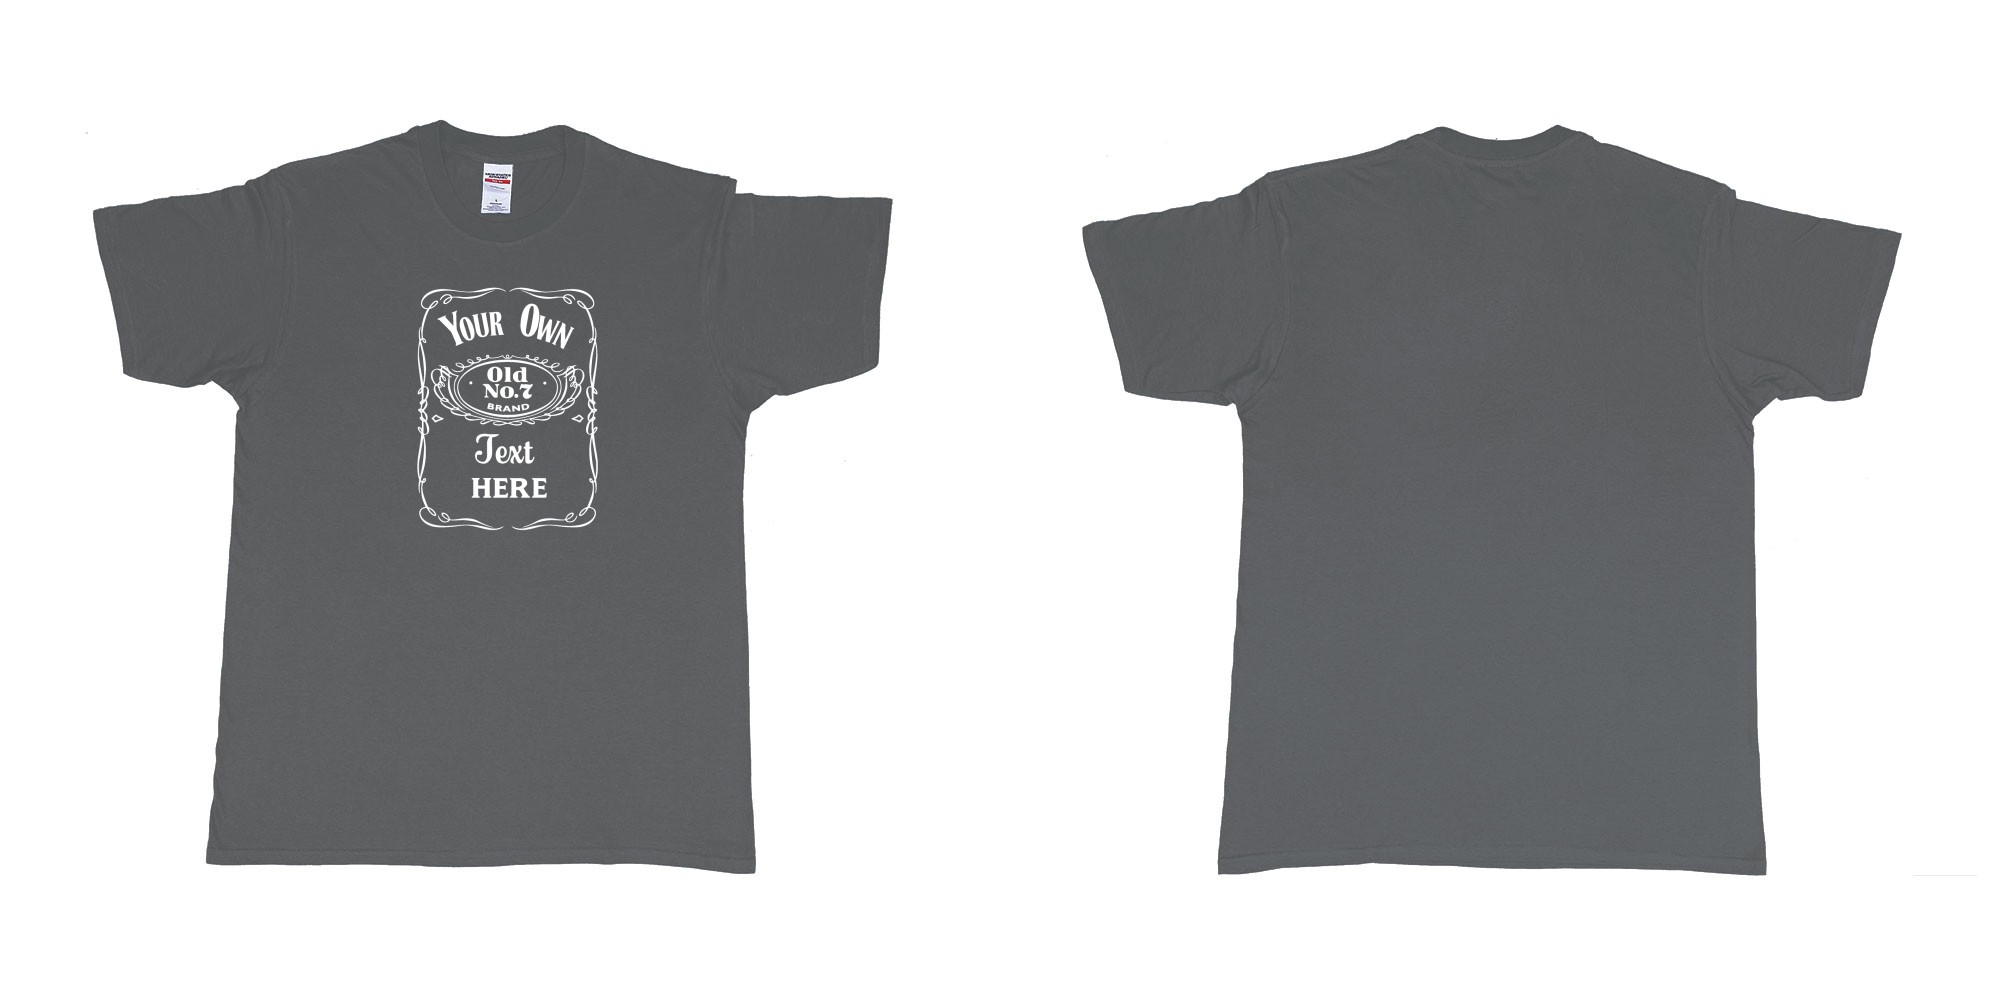 Custom tshirt design Jack Daniels Label in fabric color charcoal choice your own text made in Bali by The Pirate Way